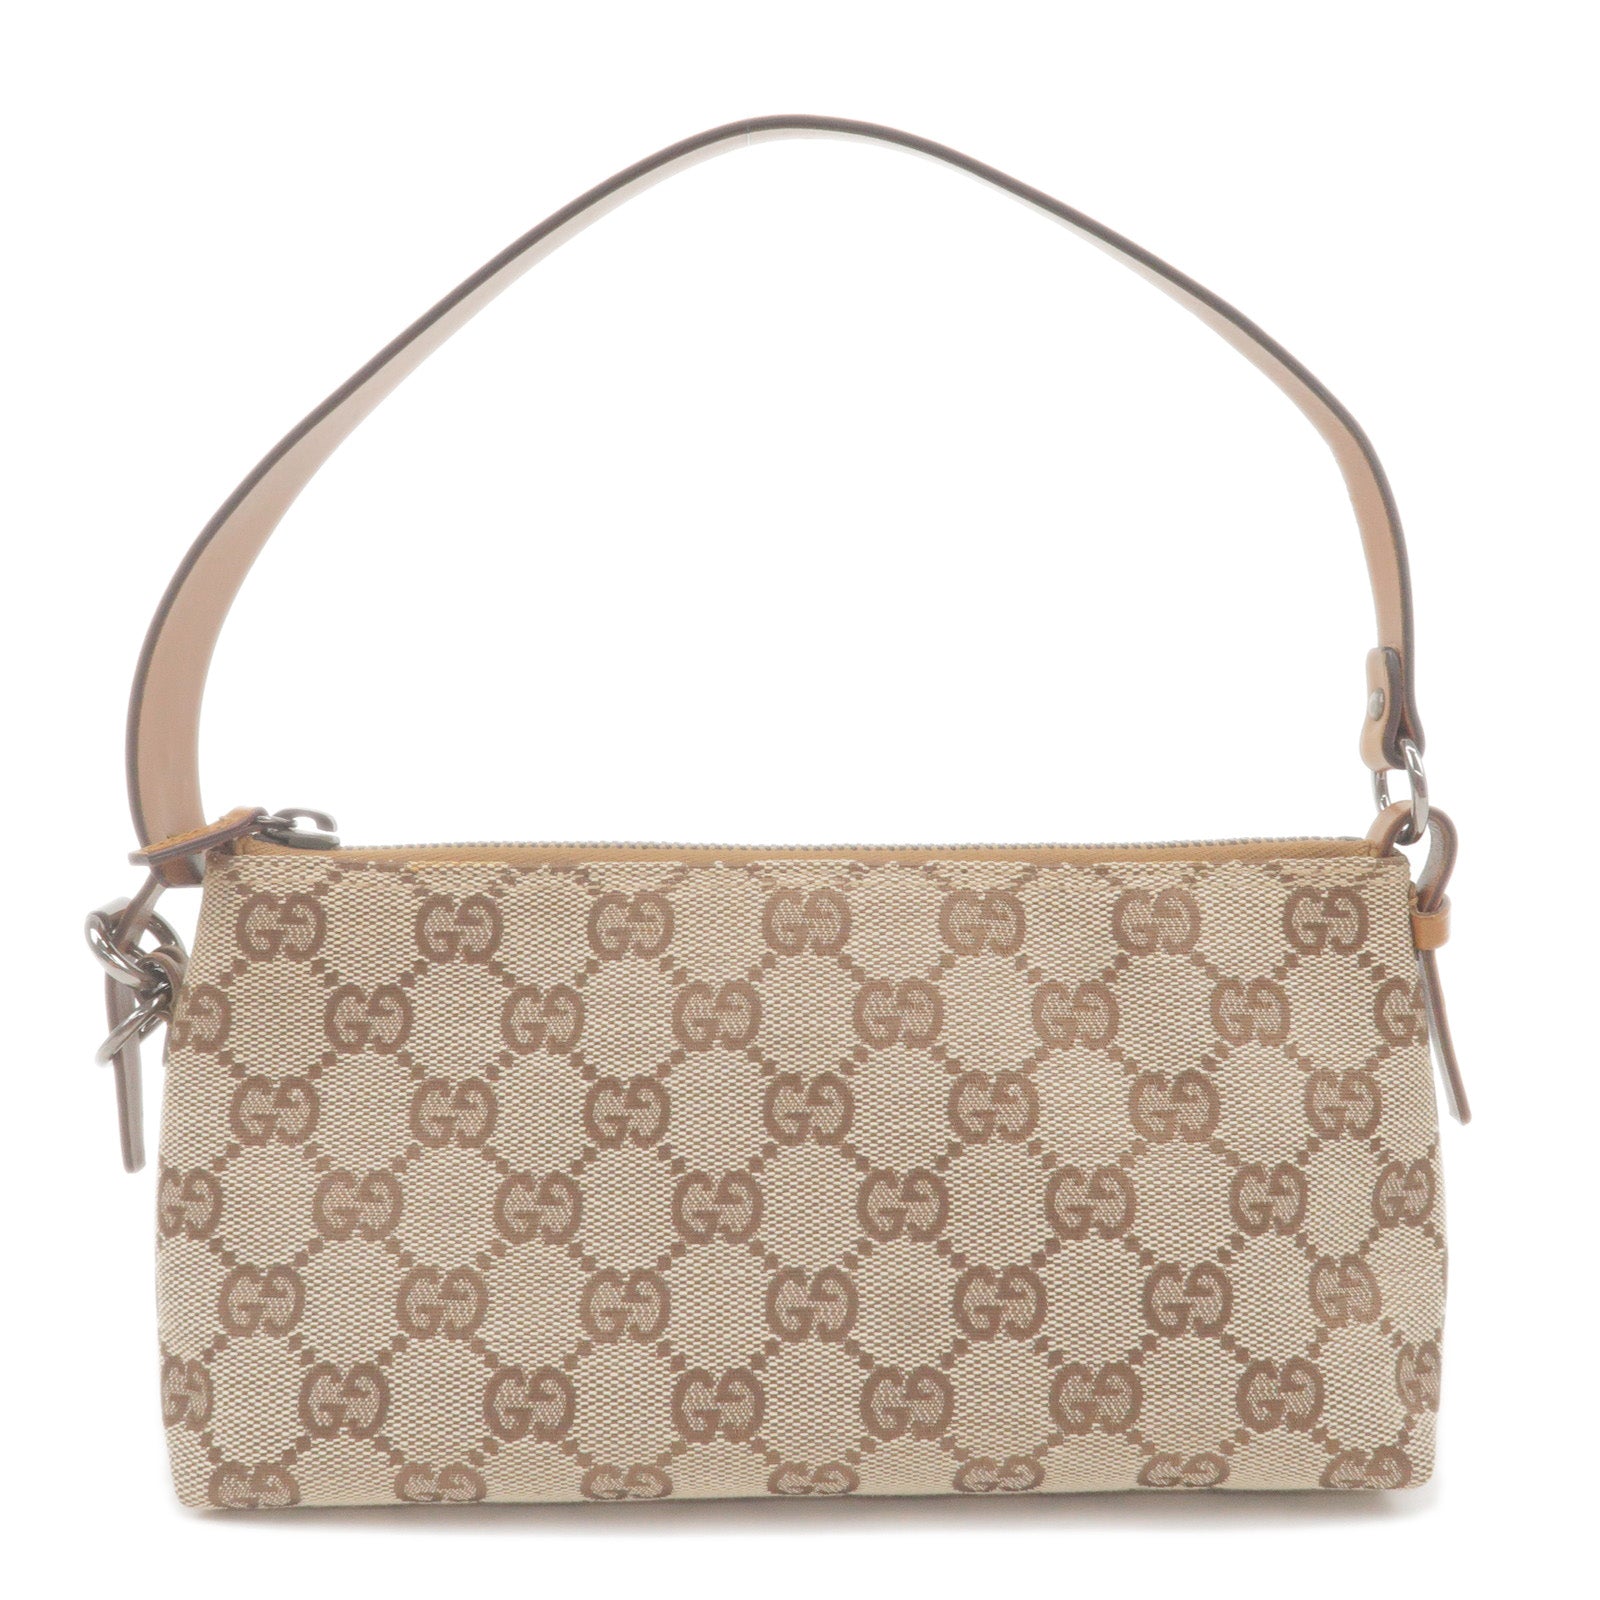 GUCCI-GG-Canvas-Leather-Hand-Bag-Pouch-Beige-Brown-103399 – dct